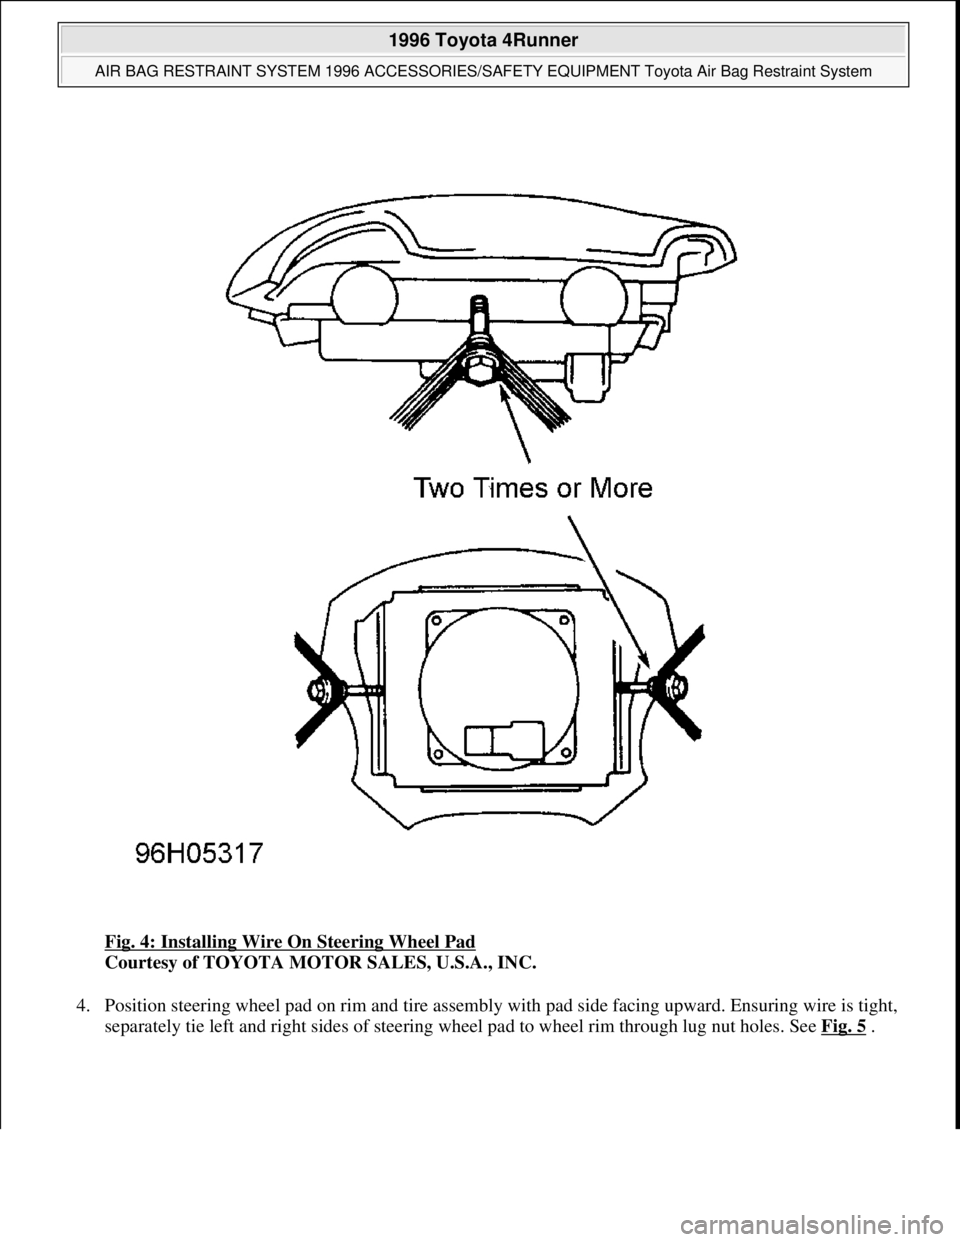 TOYOTA RAV4 1996  Service Repair Manual Fig. 4: Installing Wire On Steering Wheel Pad 
Courtesy of TOYOTA MOTOR SALES, U.S.A., INC. 
4. Position steering wheel pad on rim and tire assembly with pad side facing upward. Ensuring wire is tight